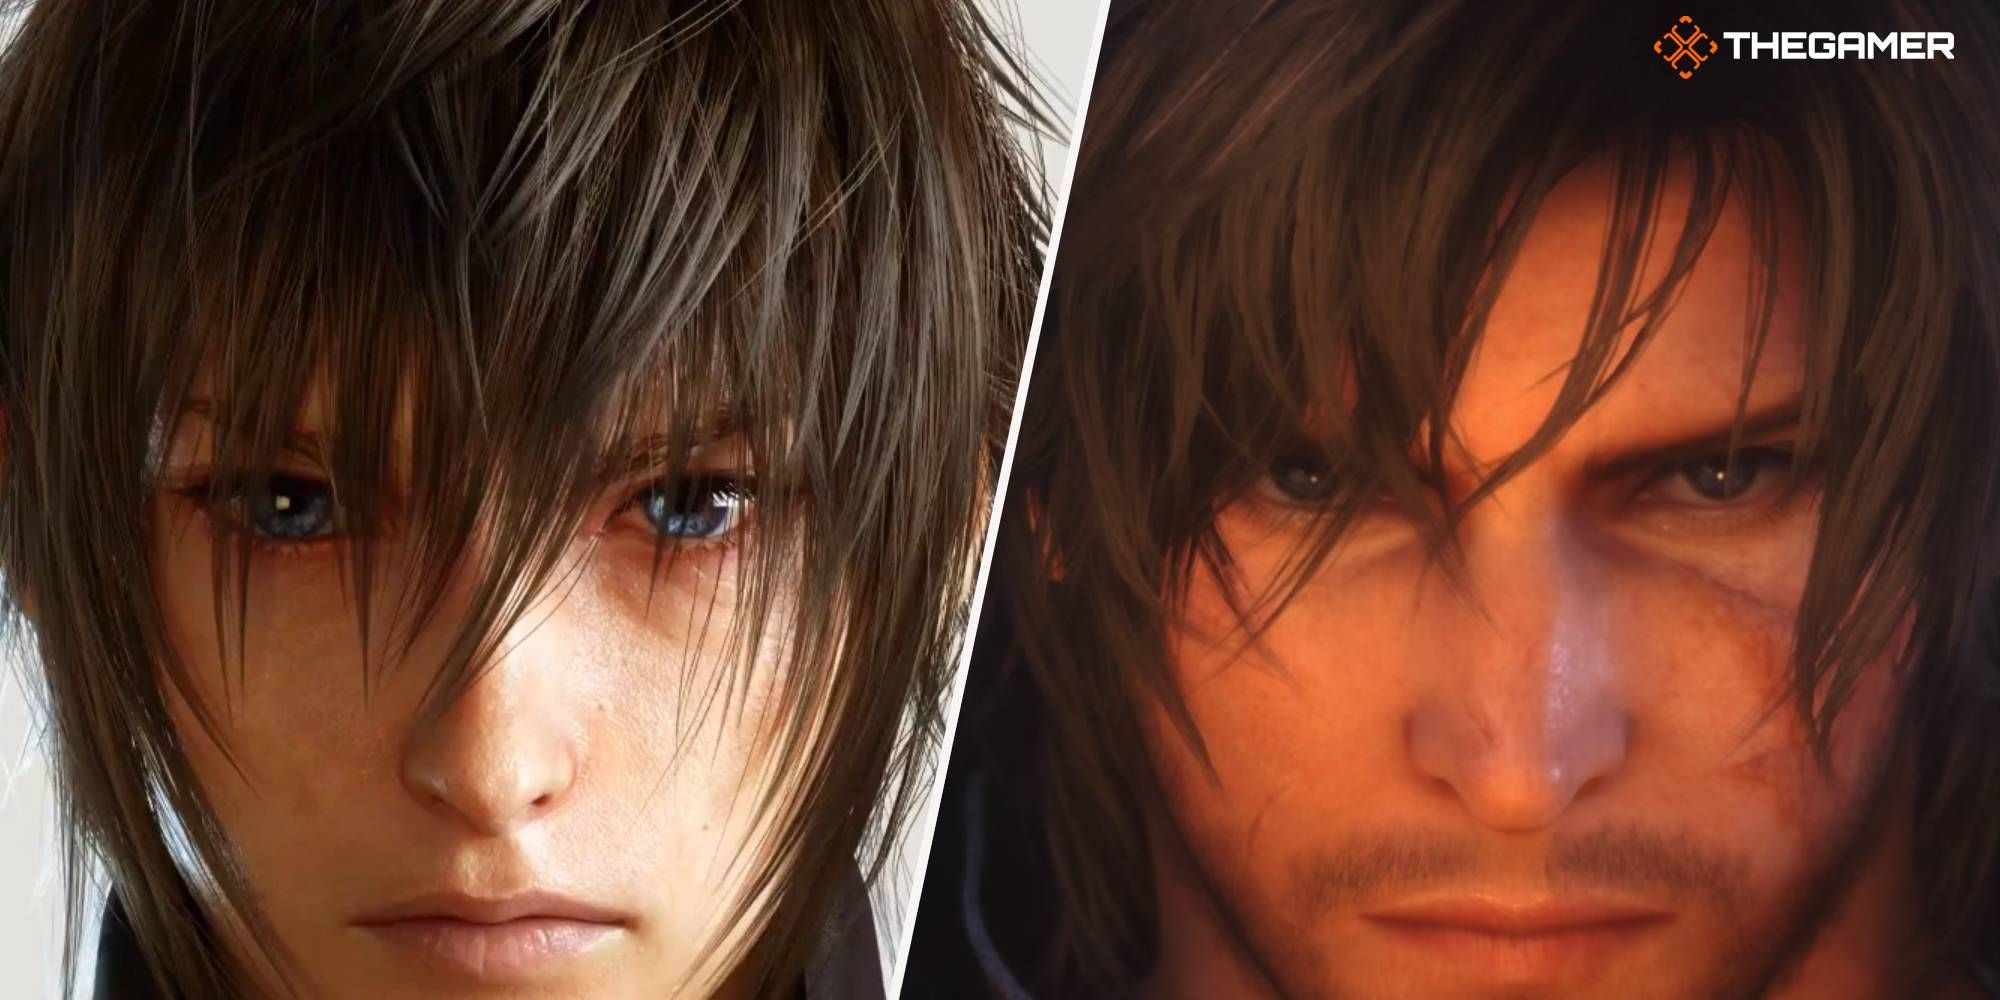 Noctis from Final Fantasy 15 and Clive from Final Fantasy 16